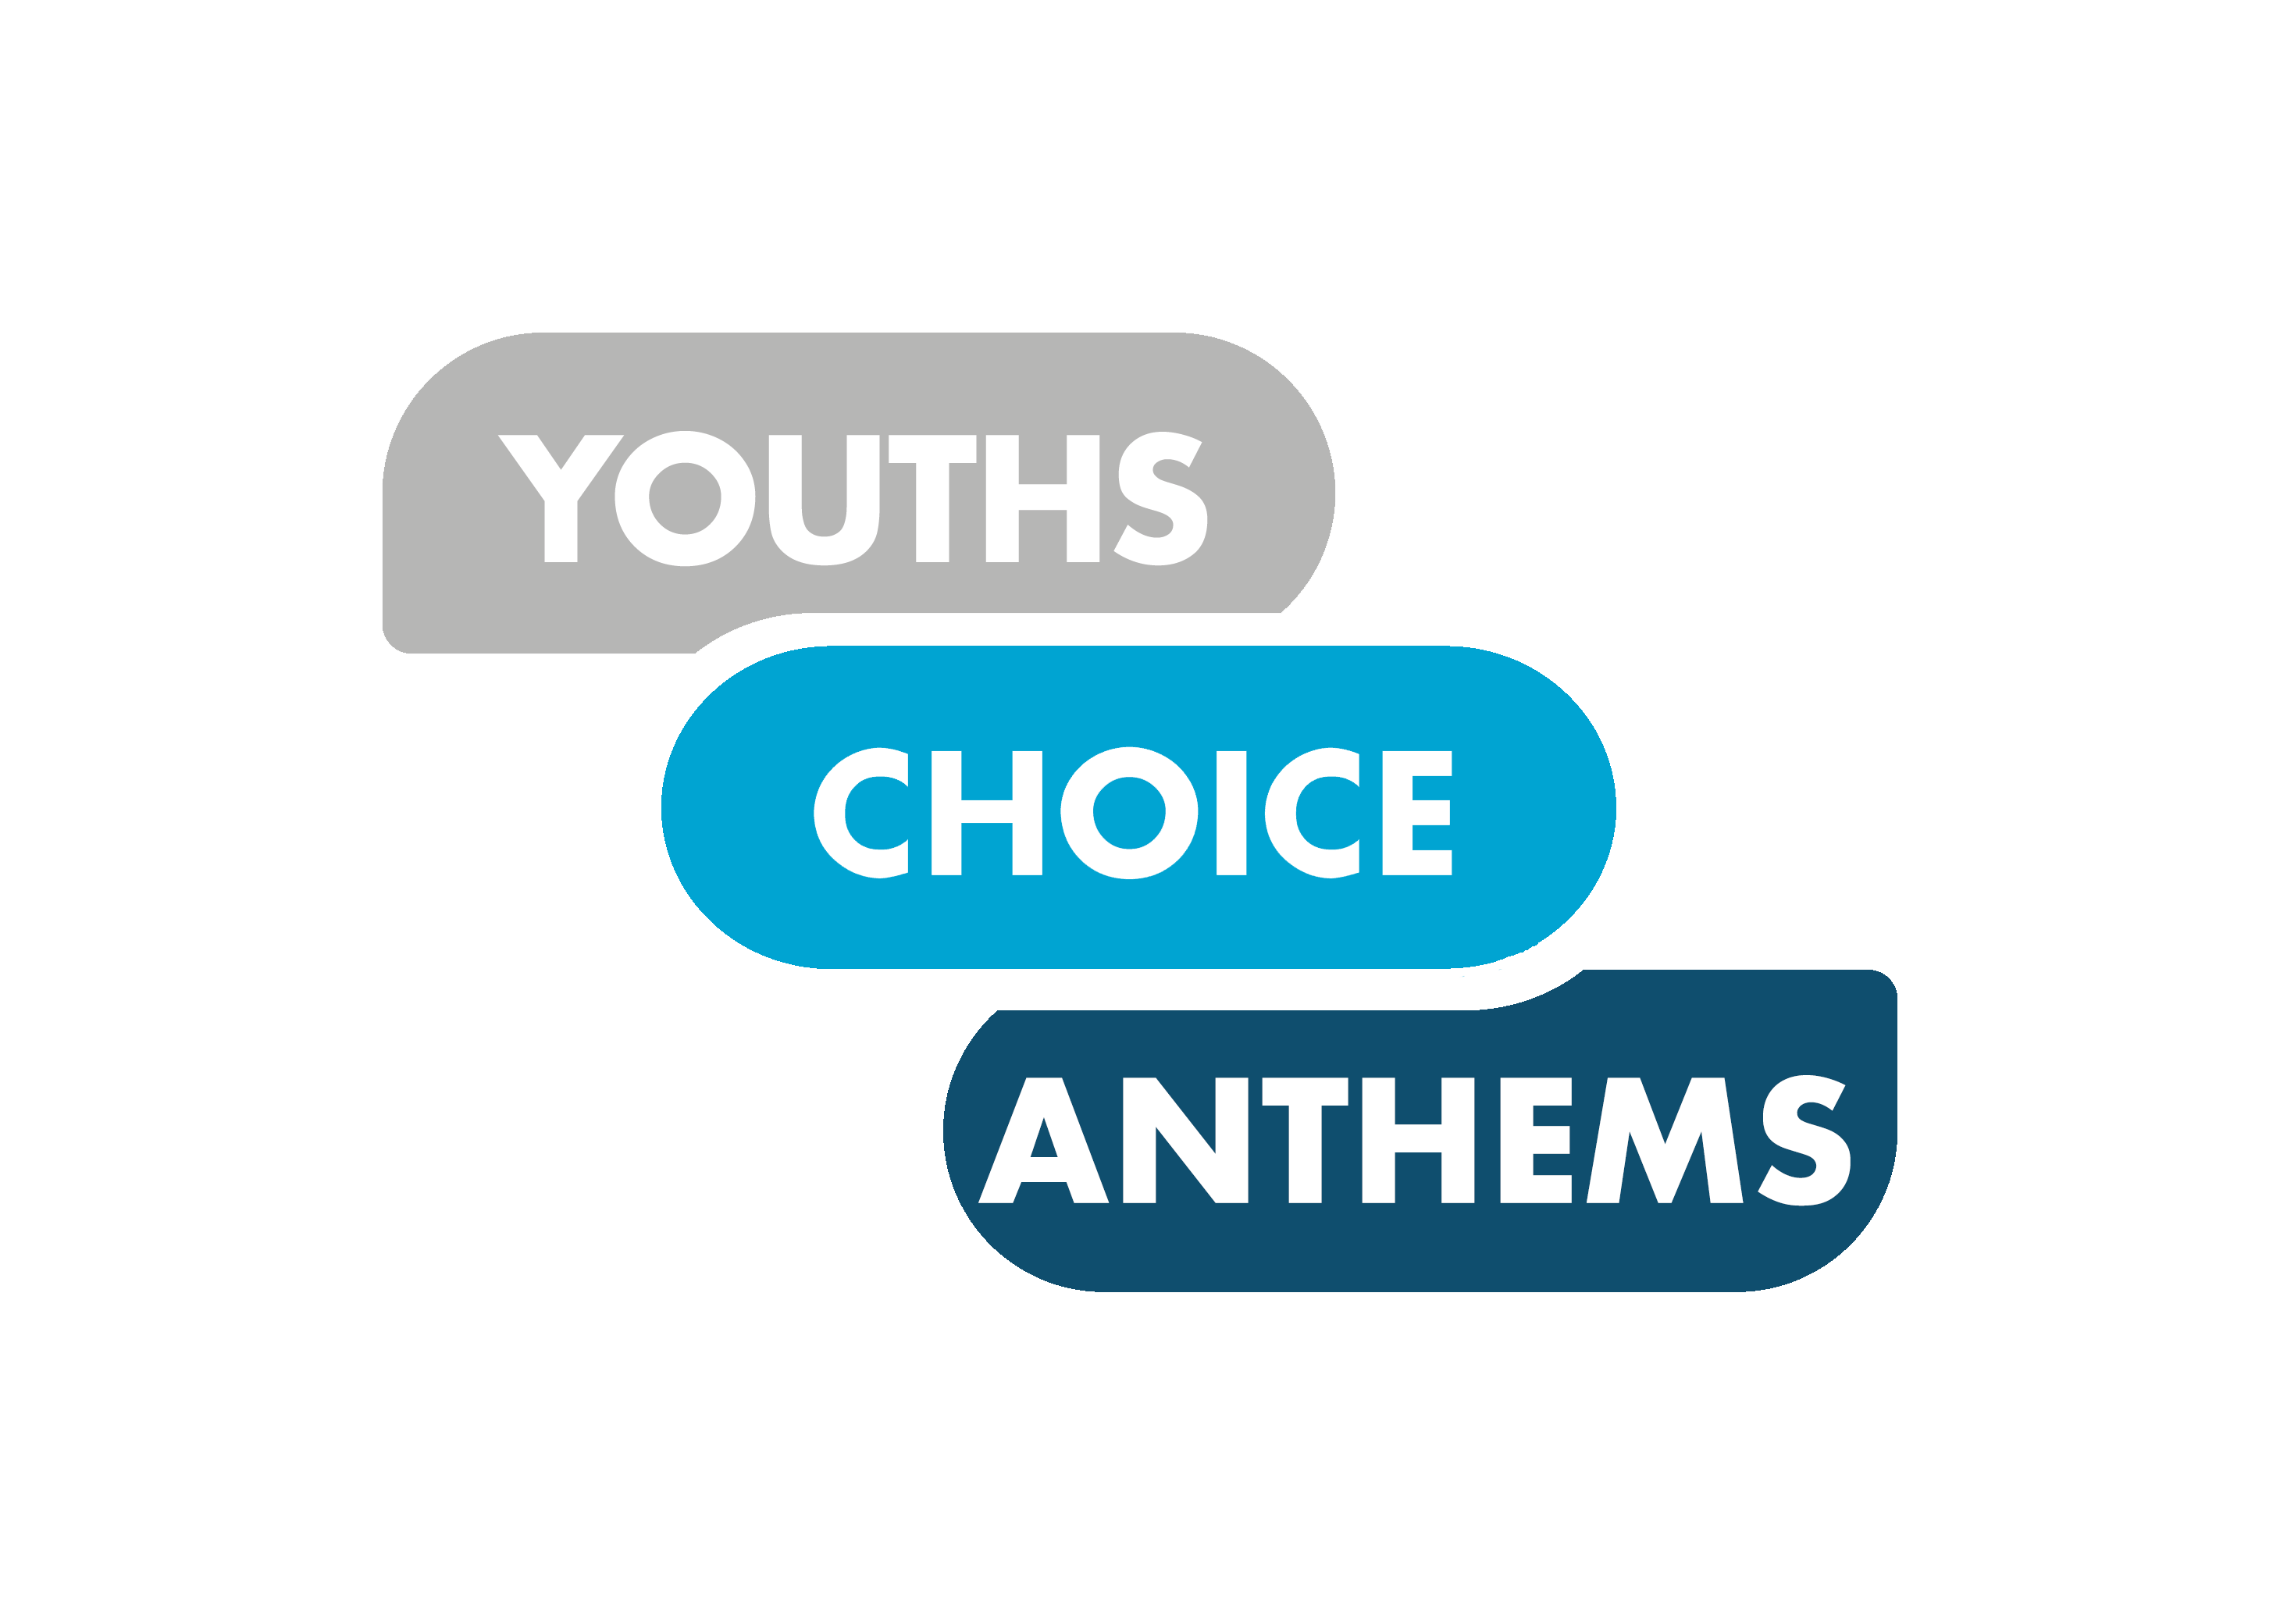 Youths Choice Anthems